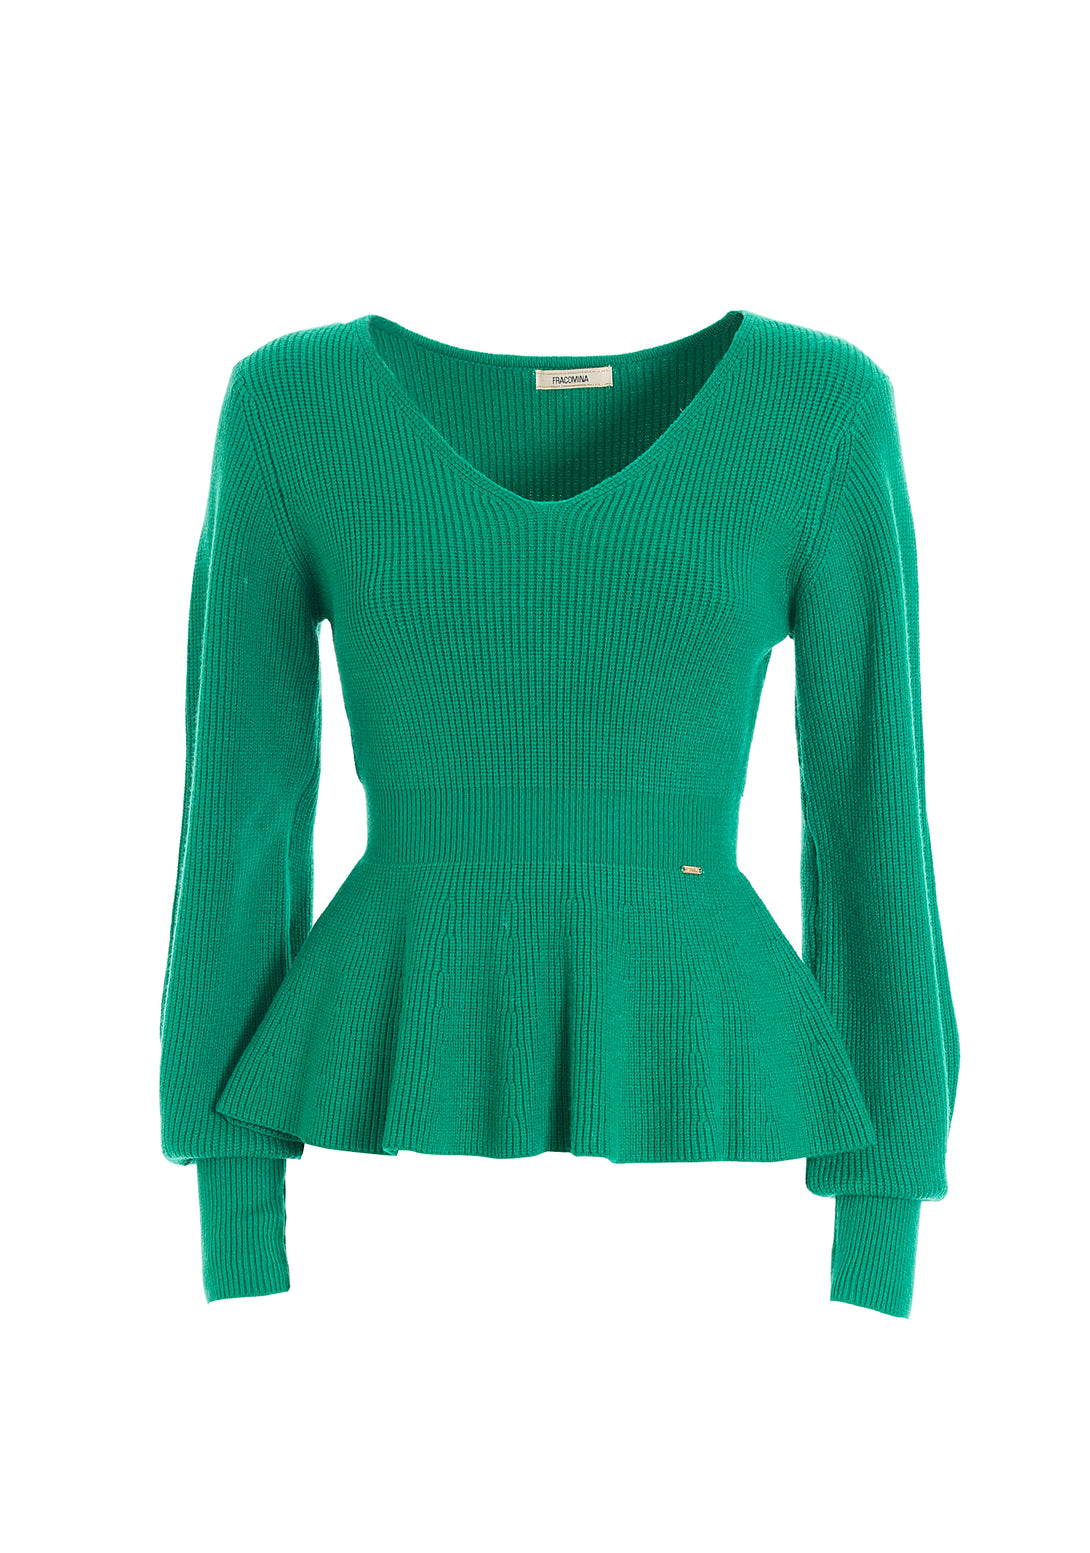 Knitwear flared with V-neck drop